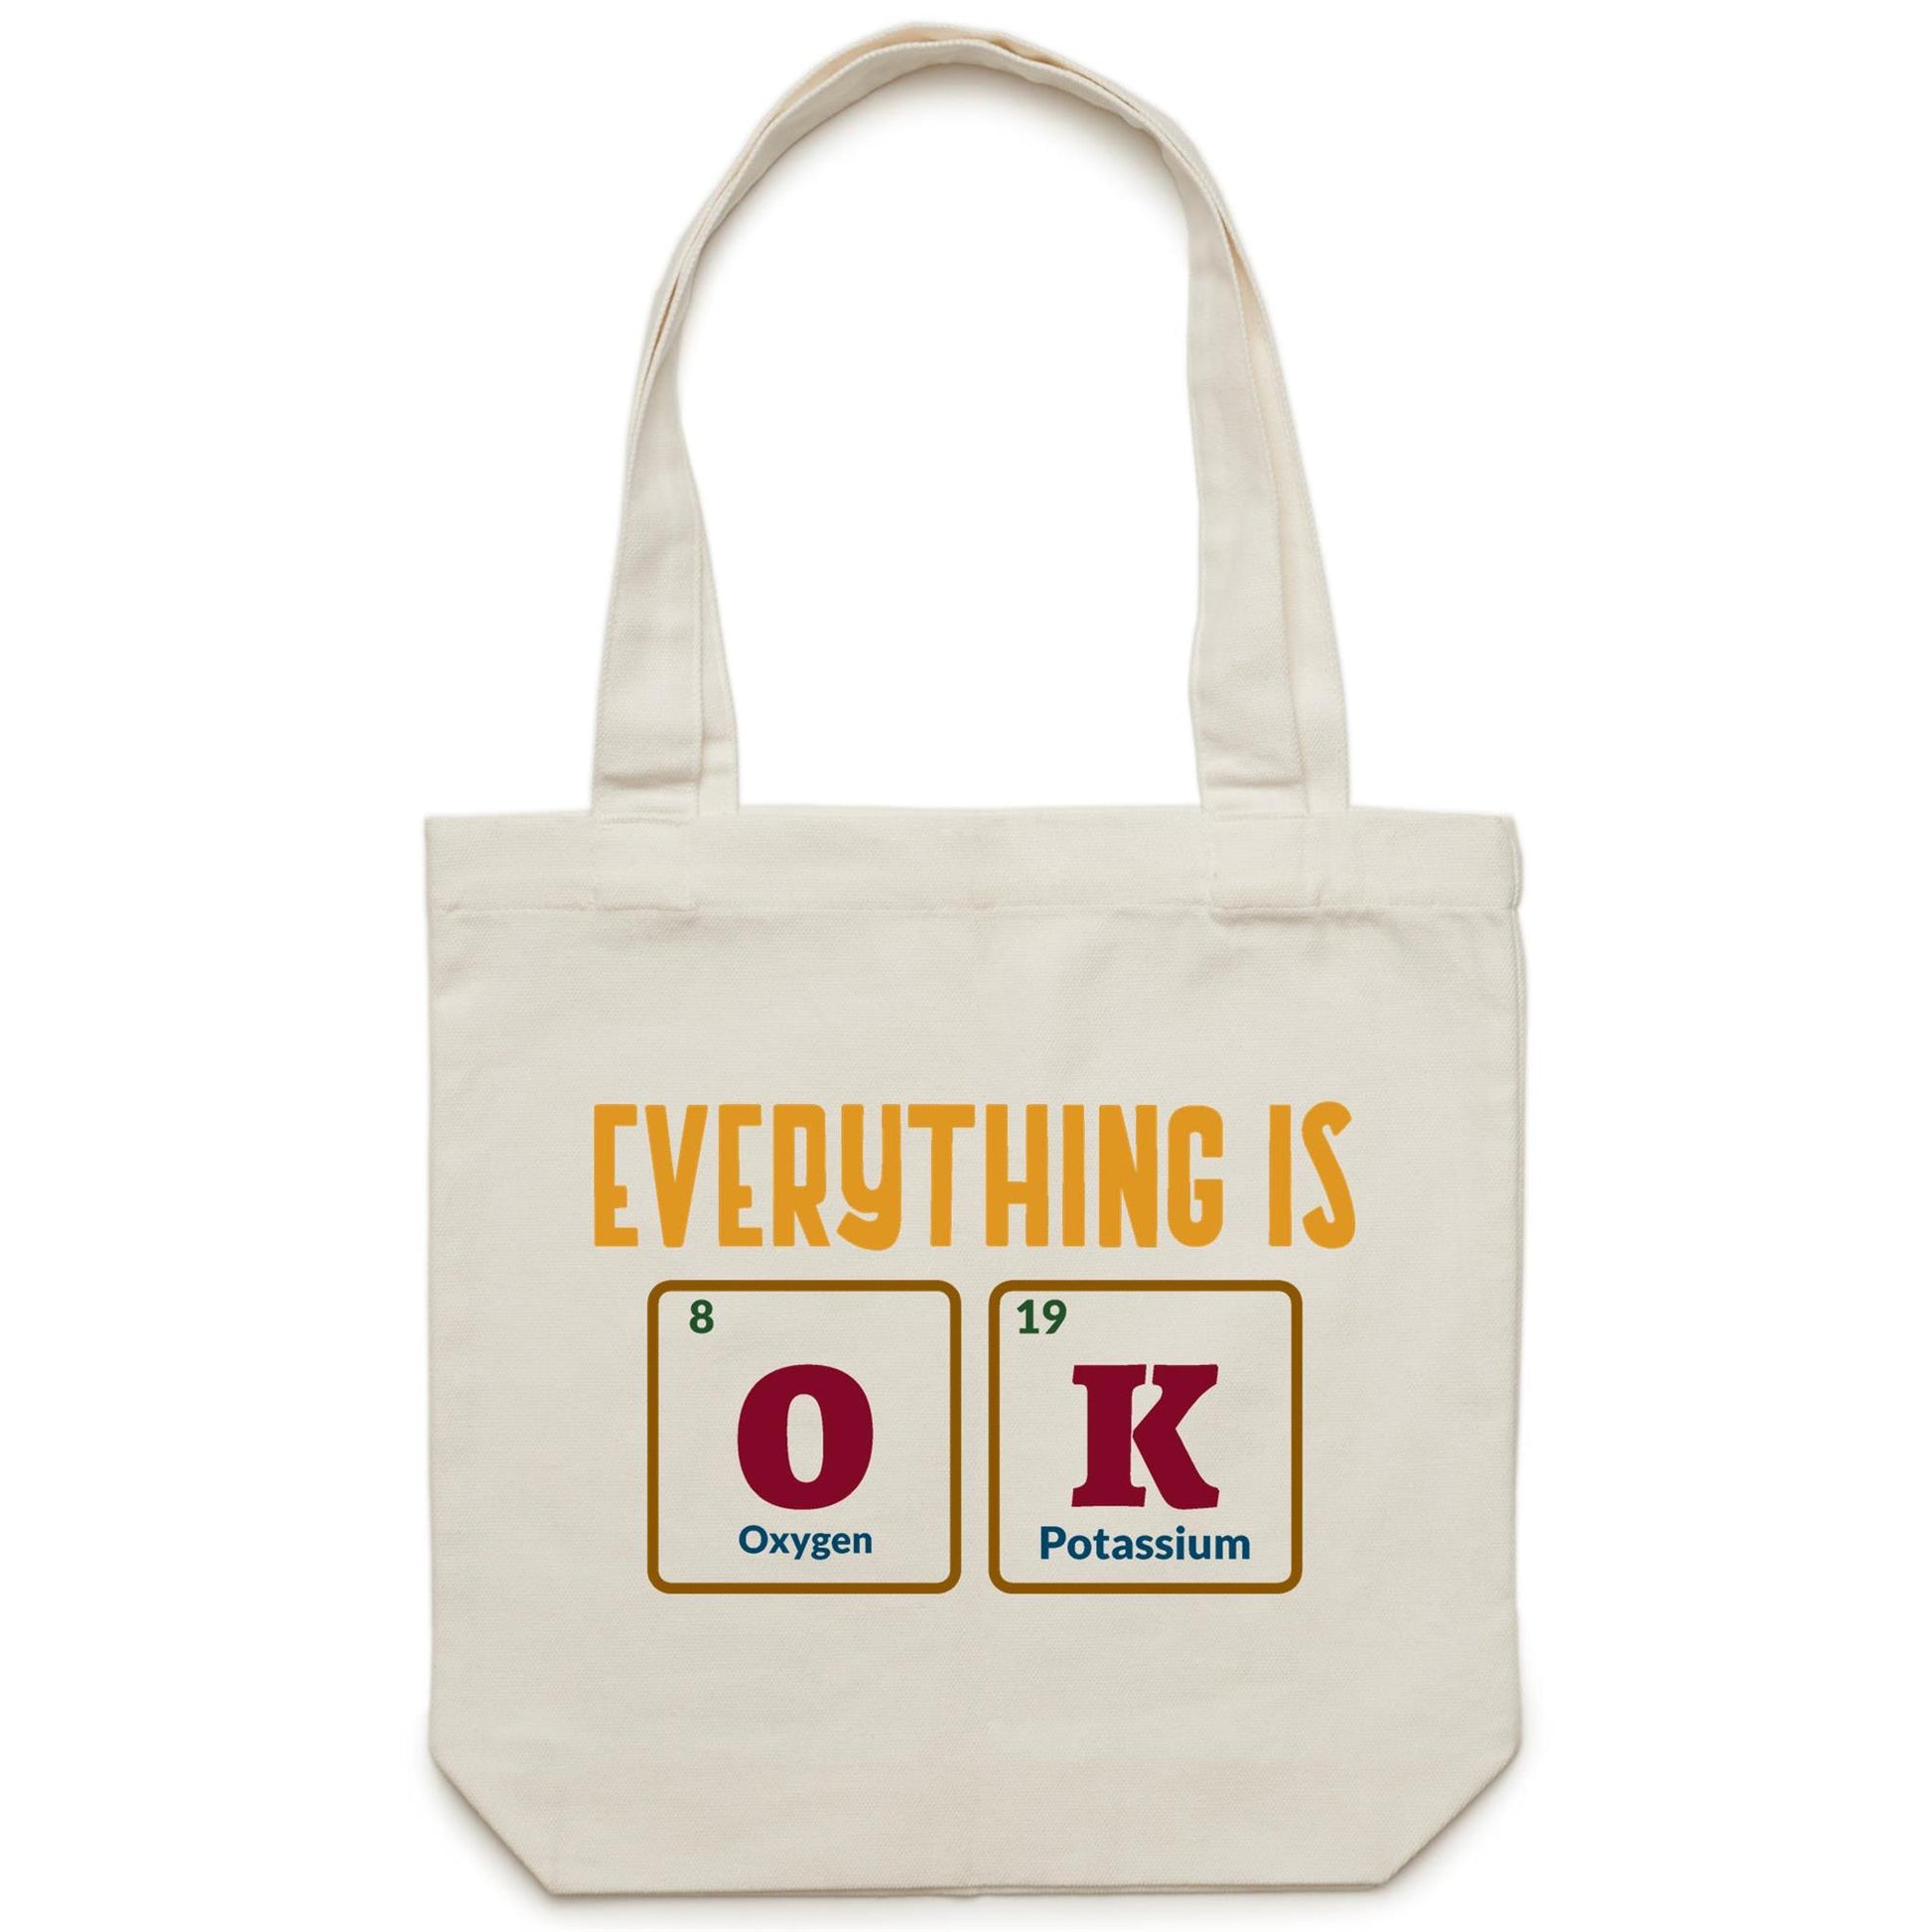 Everything Is OK, Periodic Table Of Elements - Canvas Tote Bag Cream One Size Tote Bag Science